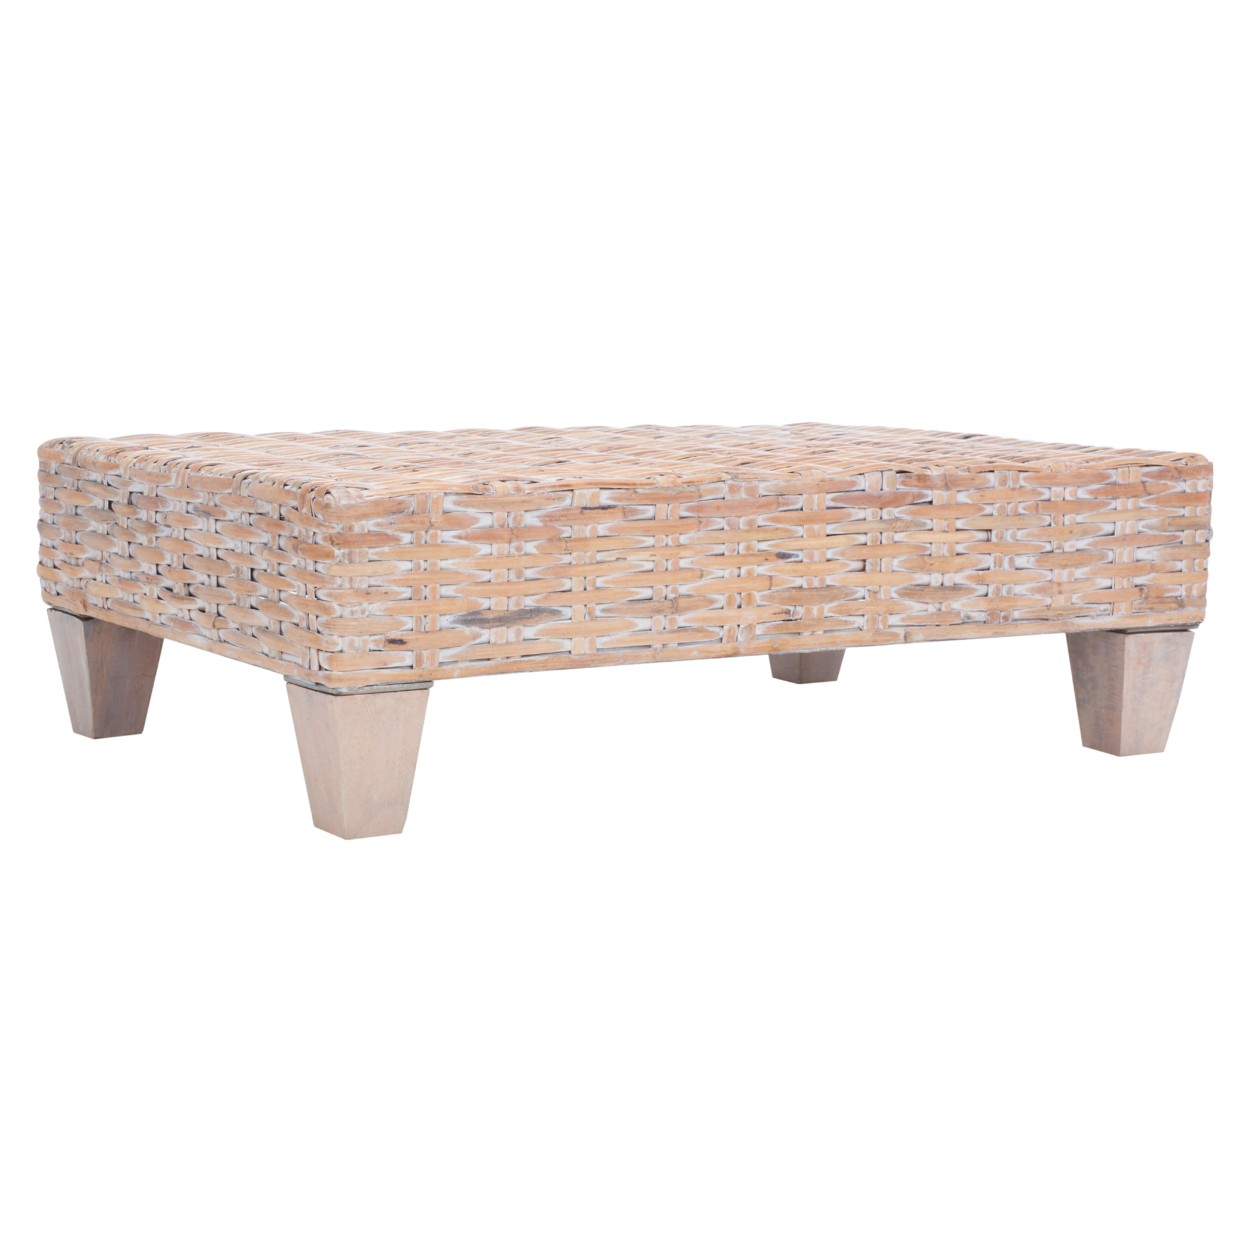 SAFAVIEH Leary Bench Natural White Wash